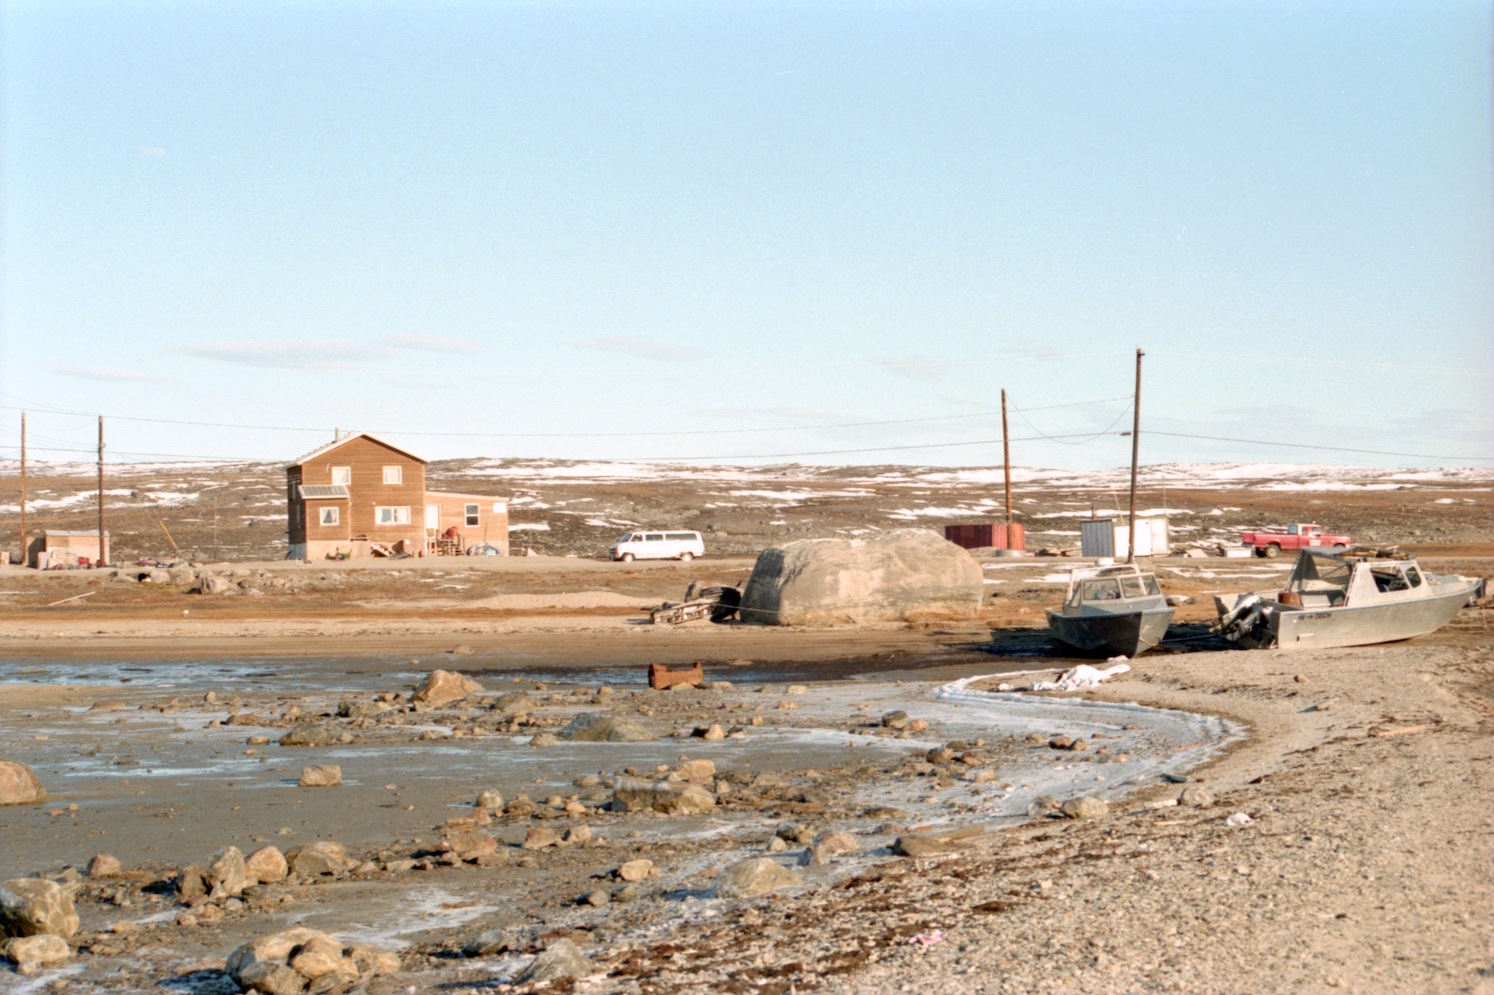 Photographs of Clyde River, Nunavut, Canada (page 5 of 12)